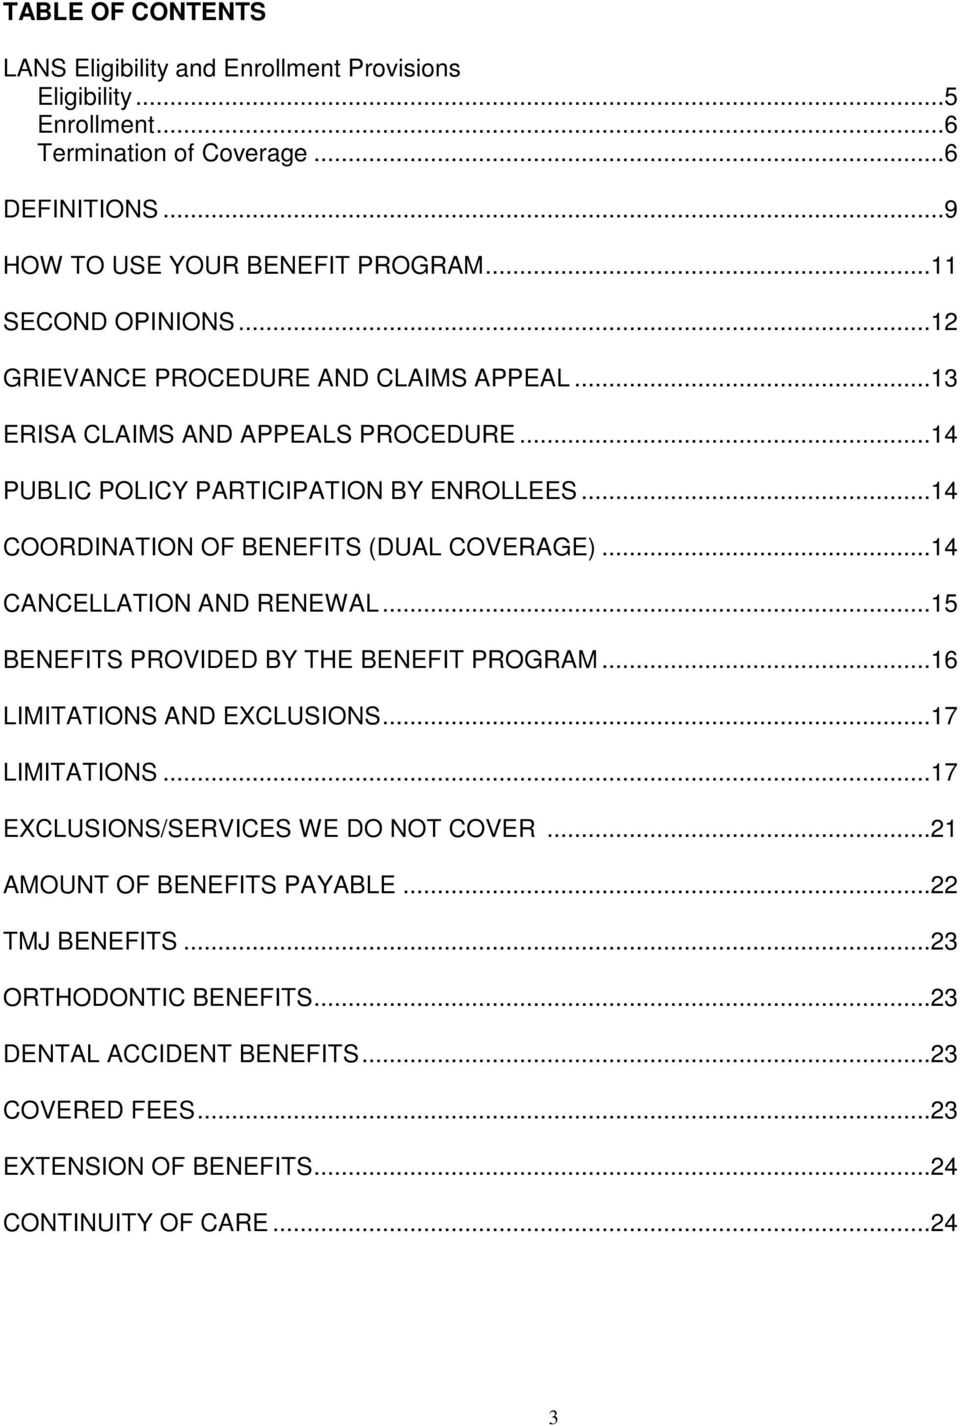 ..14 COORDINATION OF BENEFITS (DUAL COVERAGE)...14 CANCELLATION AND RENEWAL...15 BENEFITS PROVIDED BY THE BENEFIT PROGRAM...16 LIMITATIONS AND EXCLUSIONS...17 LIMITATIONS.